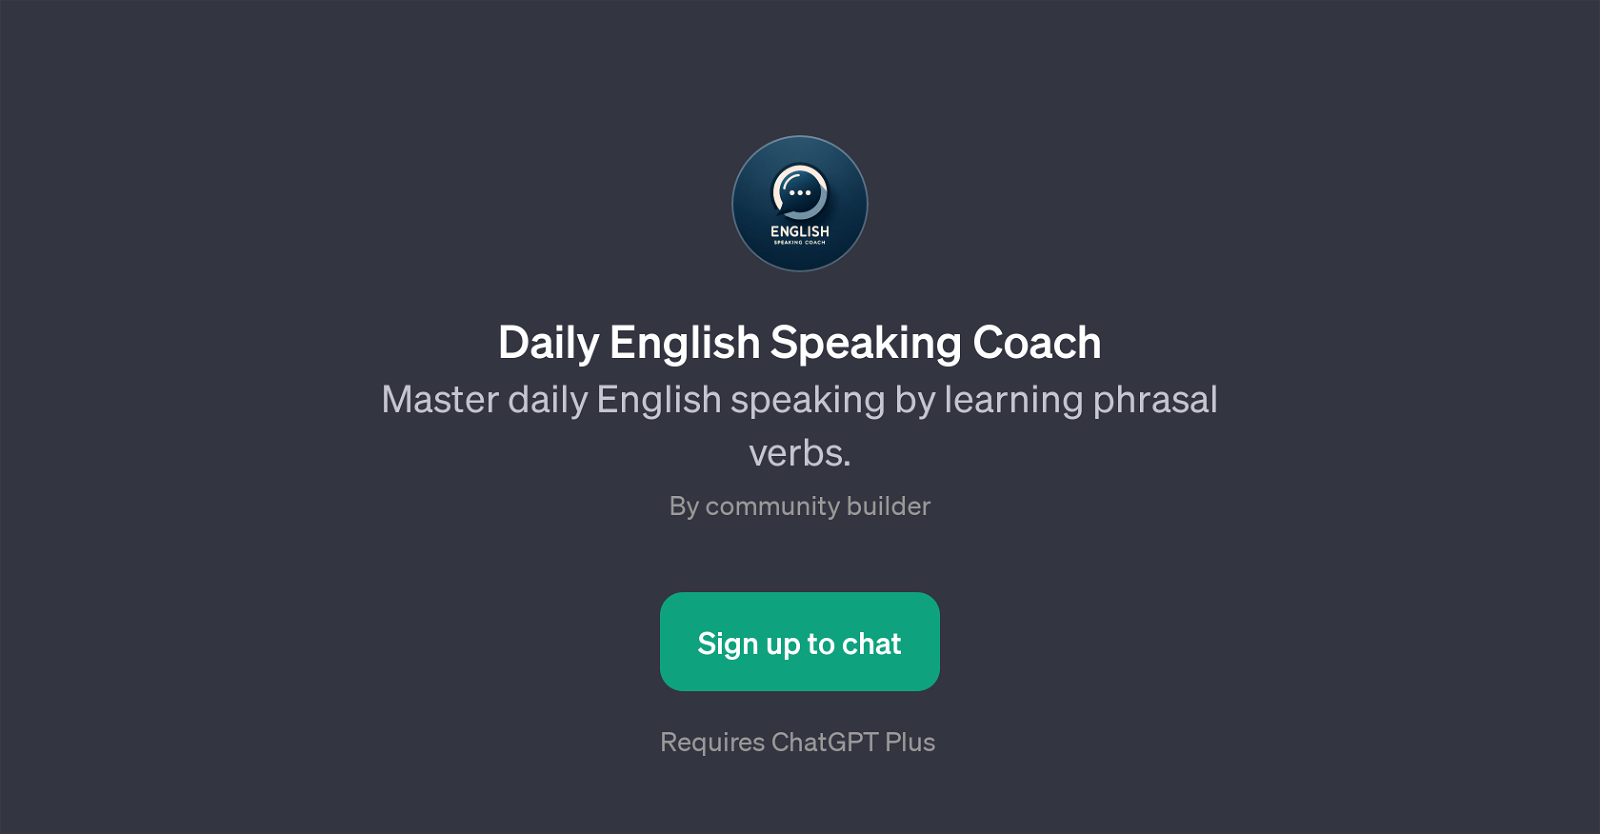 Daily English Speaking Coach website